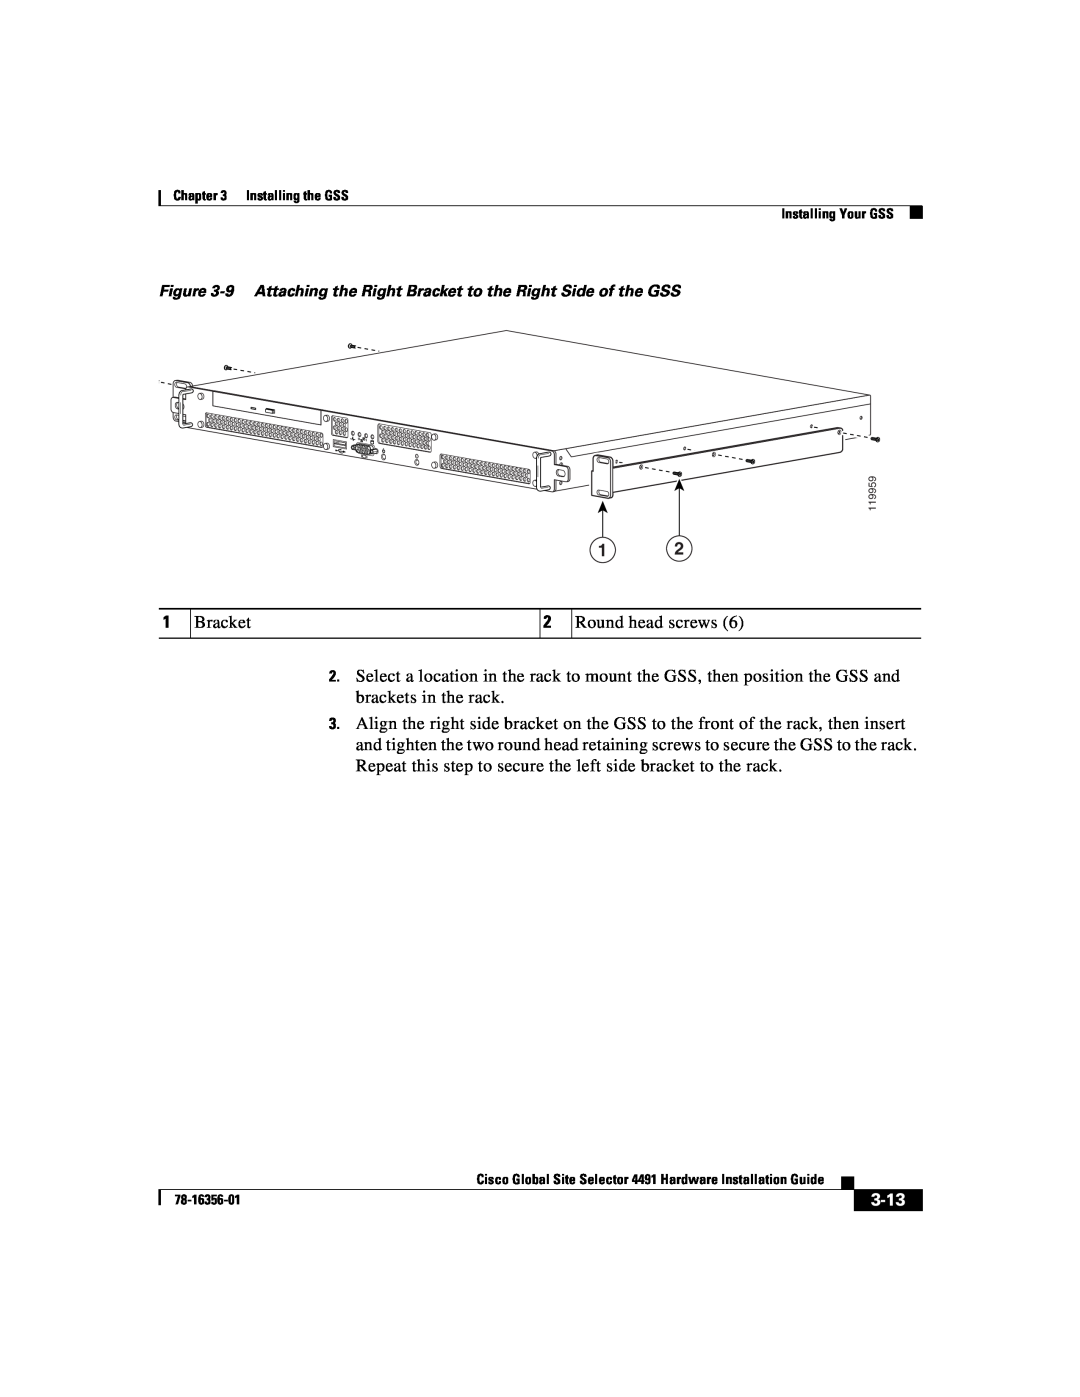 Cisco Systems 78-16356-01 manual 3-13, 9 Attaching the Right Bracket to the Right Side of the GSS 